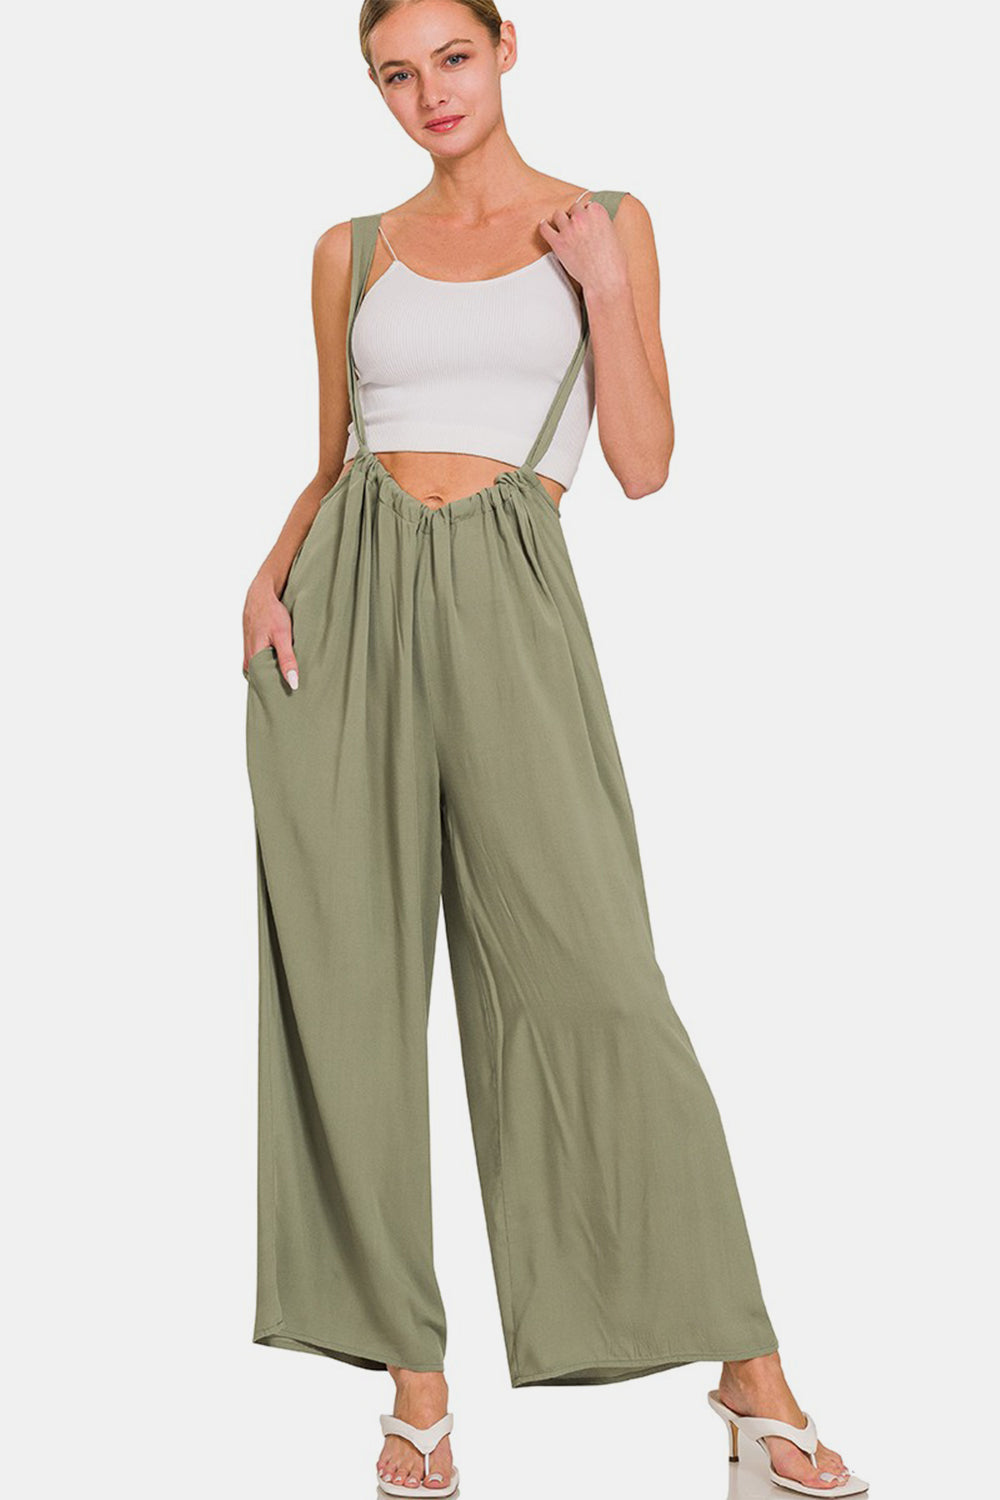 Olive Green Pocketed Wide Strap Wide Leg Overalls